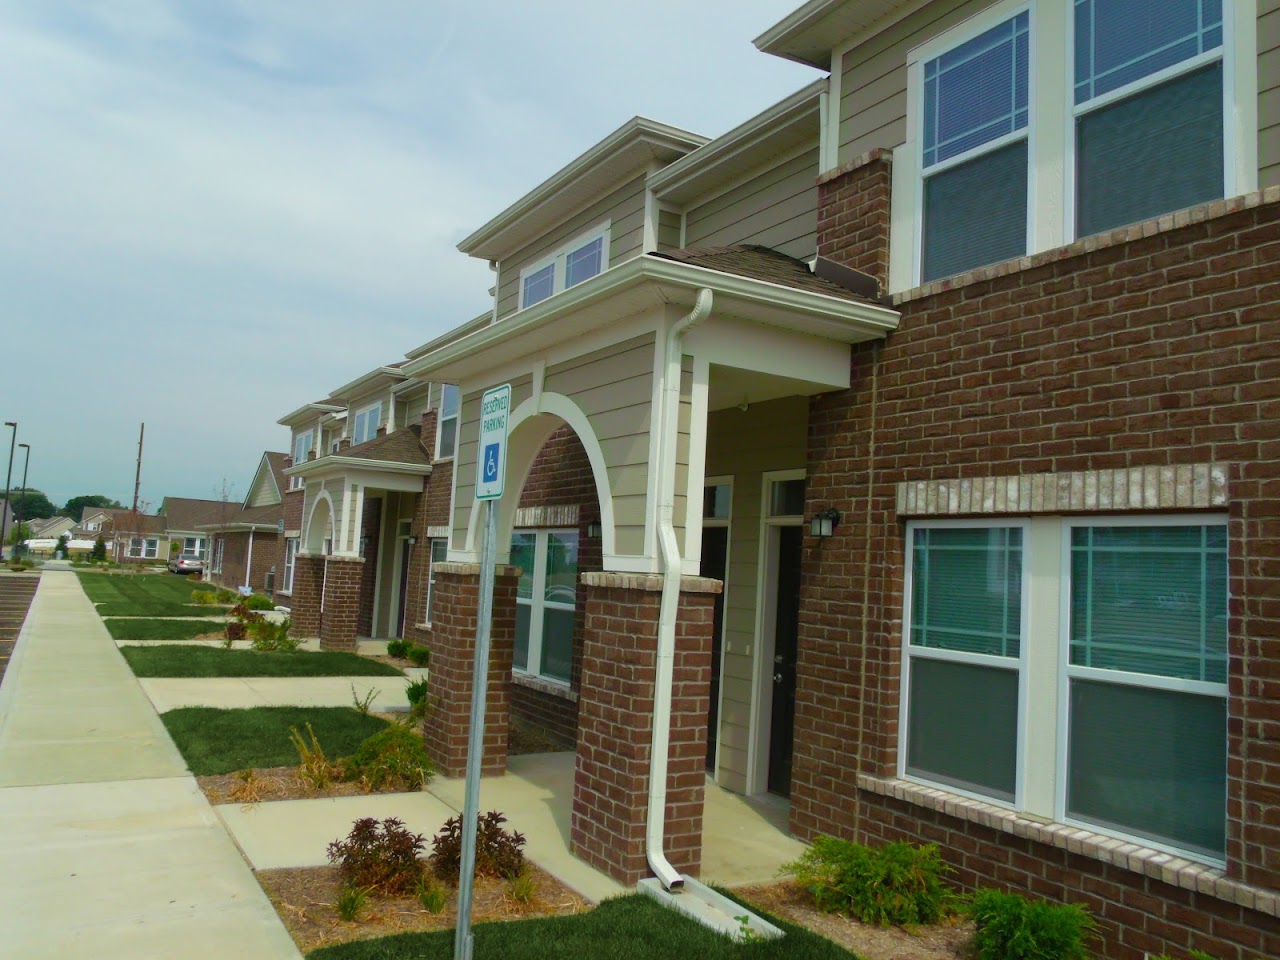 Photo of COMMONS AT WYNNE FARMS APTS. Affordable housing located at 8144 REDROCK RD E BROWNSBURG, IN 46112